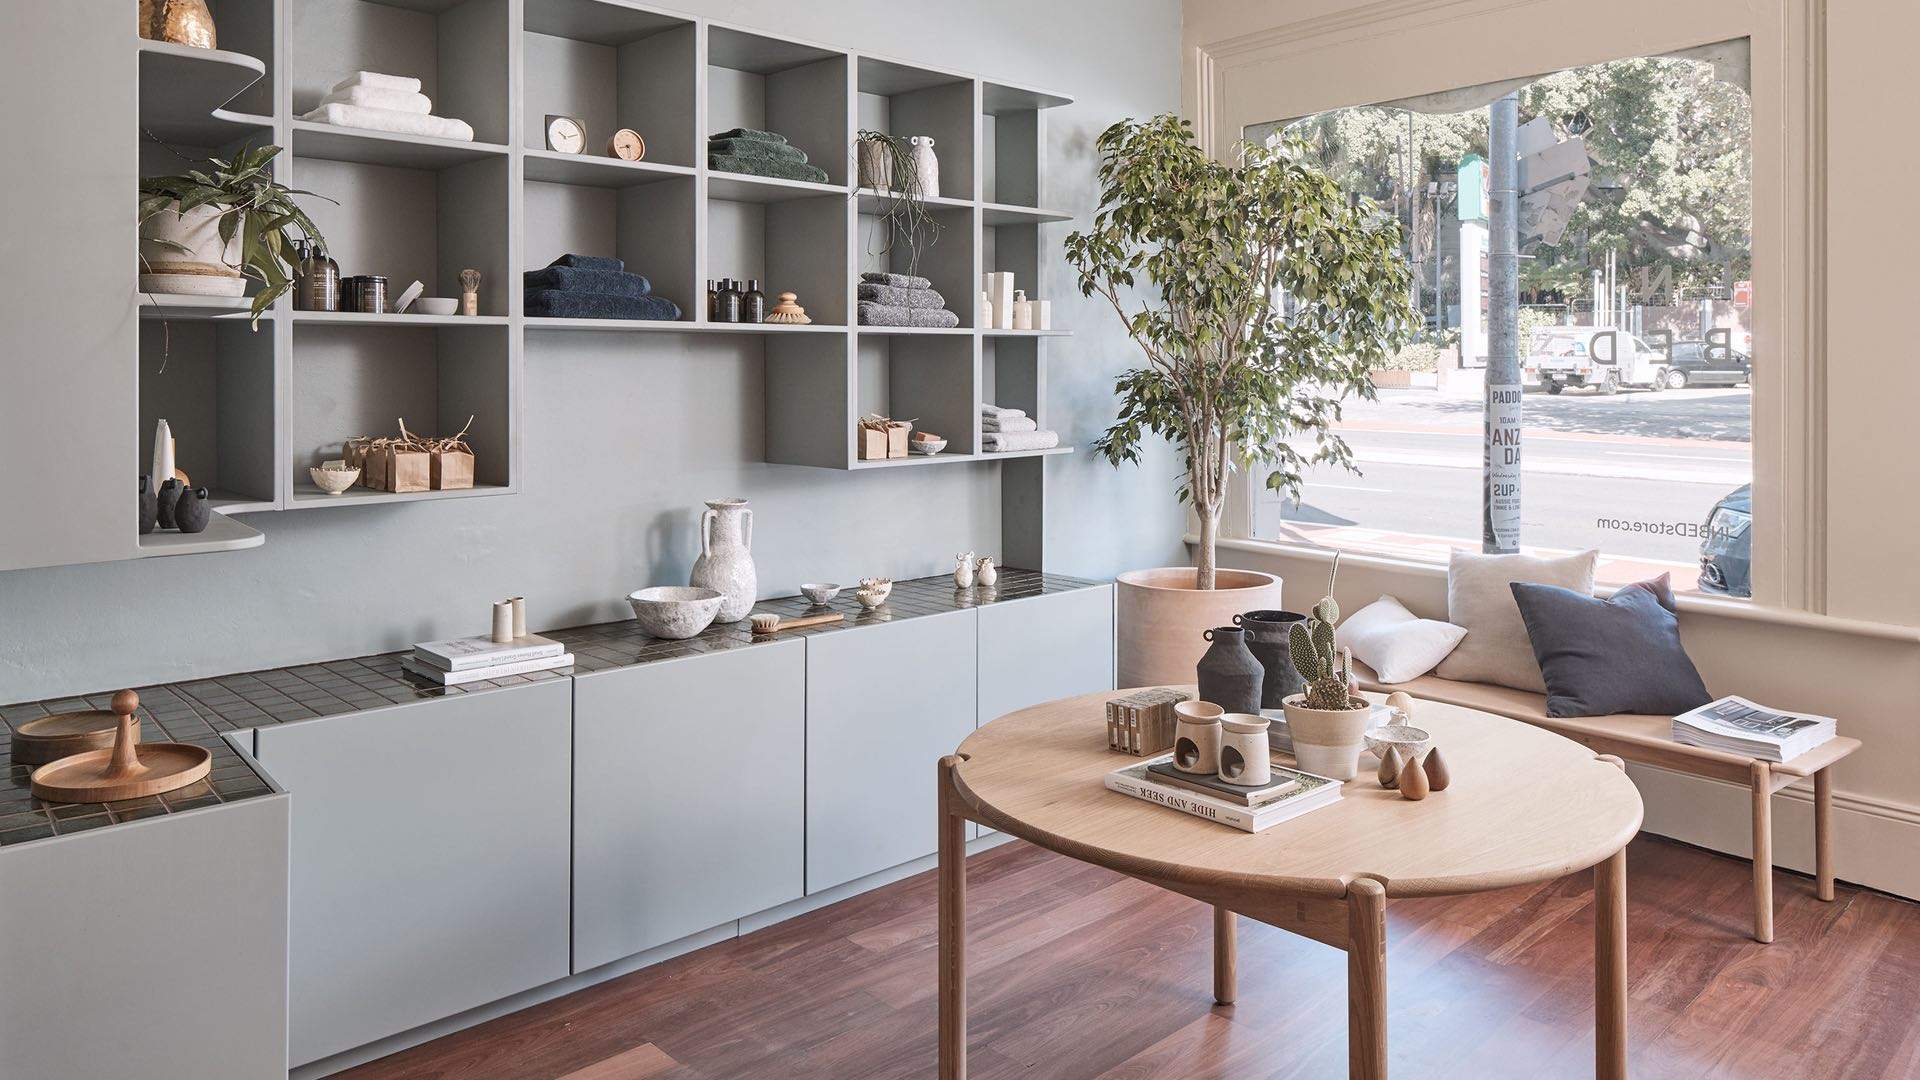 Luxury Homewares Label In Bed Has Just Opened Its First Bricks-and-Mortar Store in Sydney